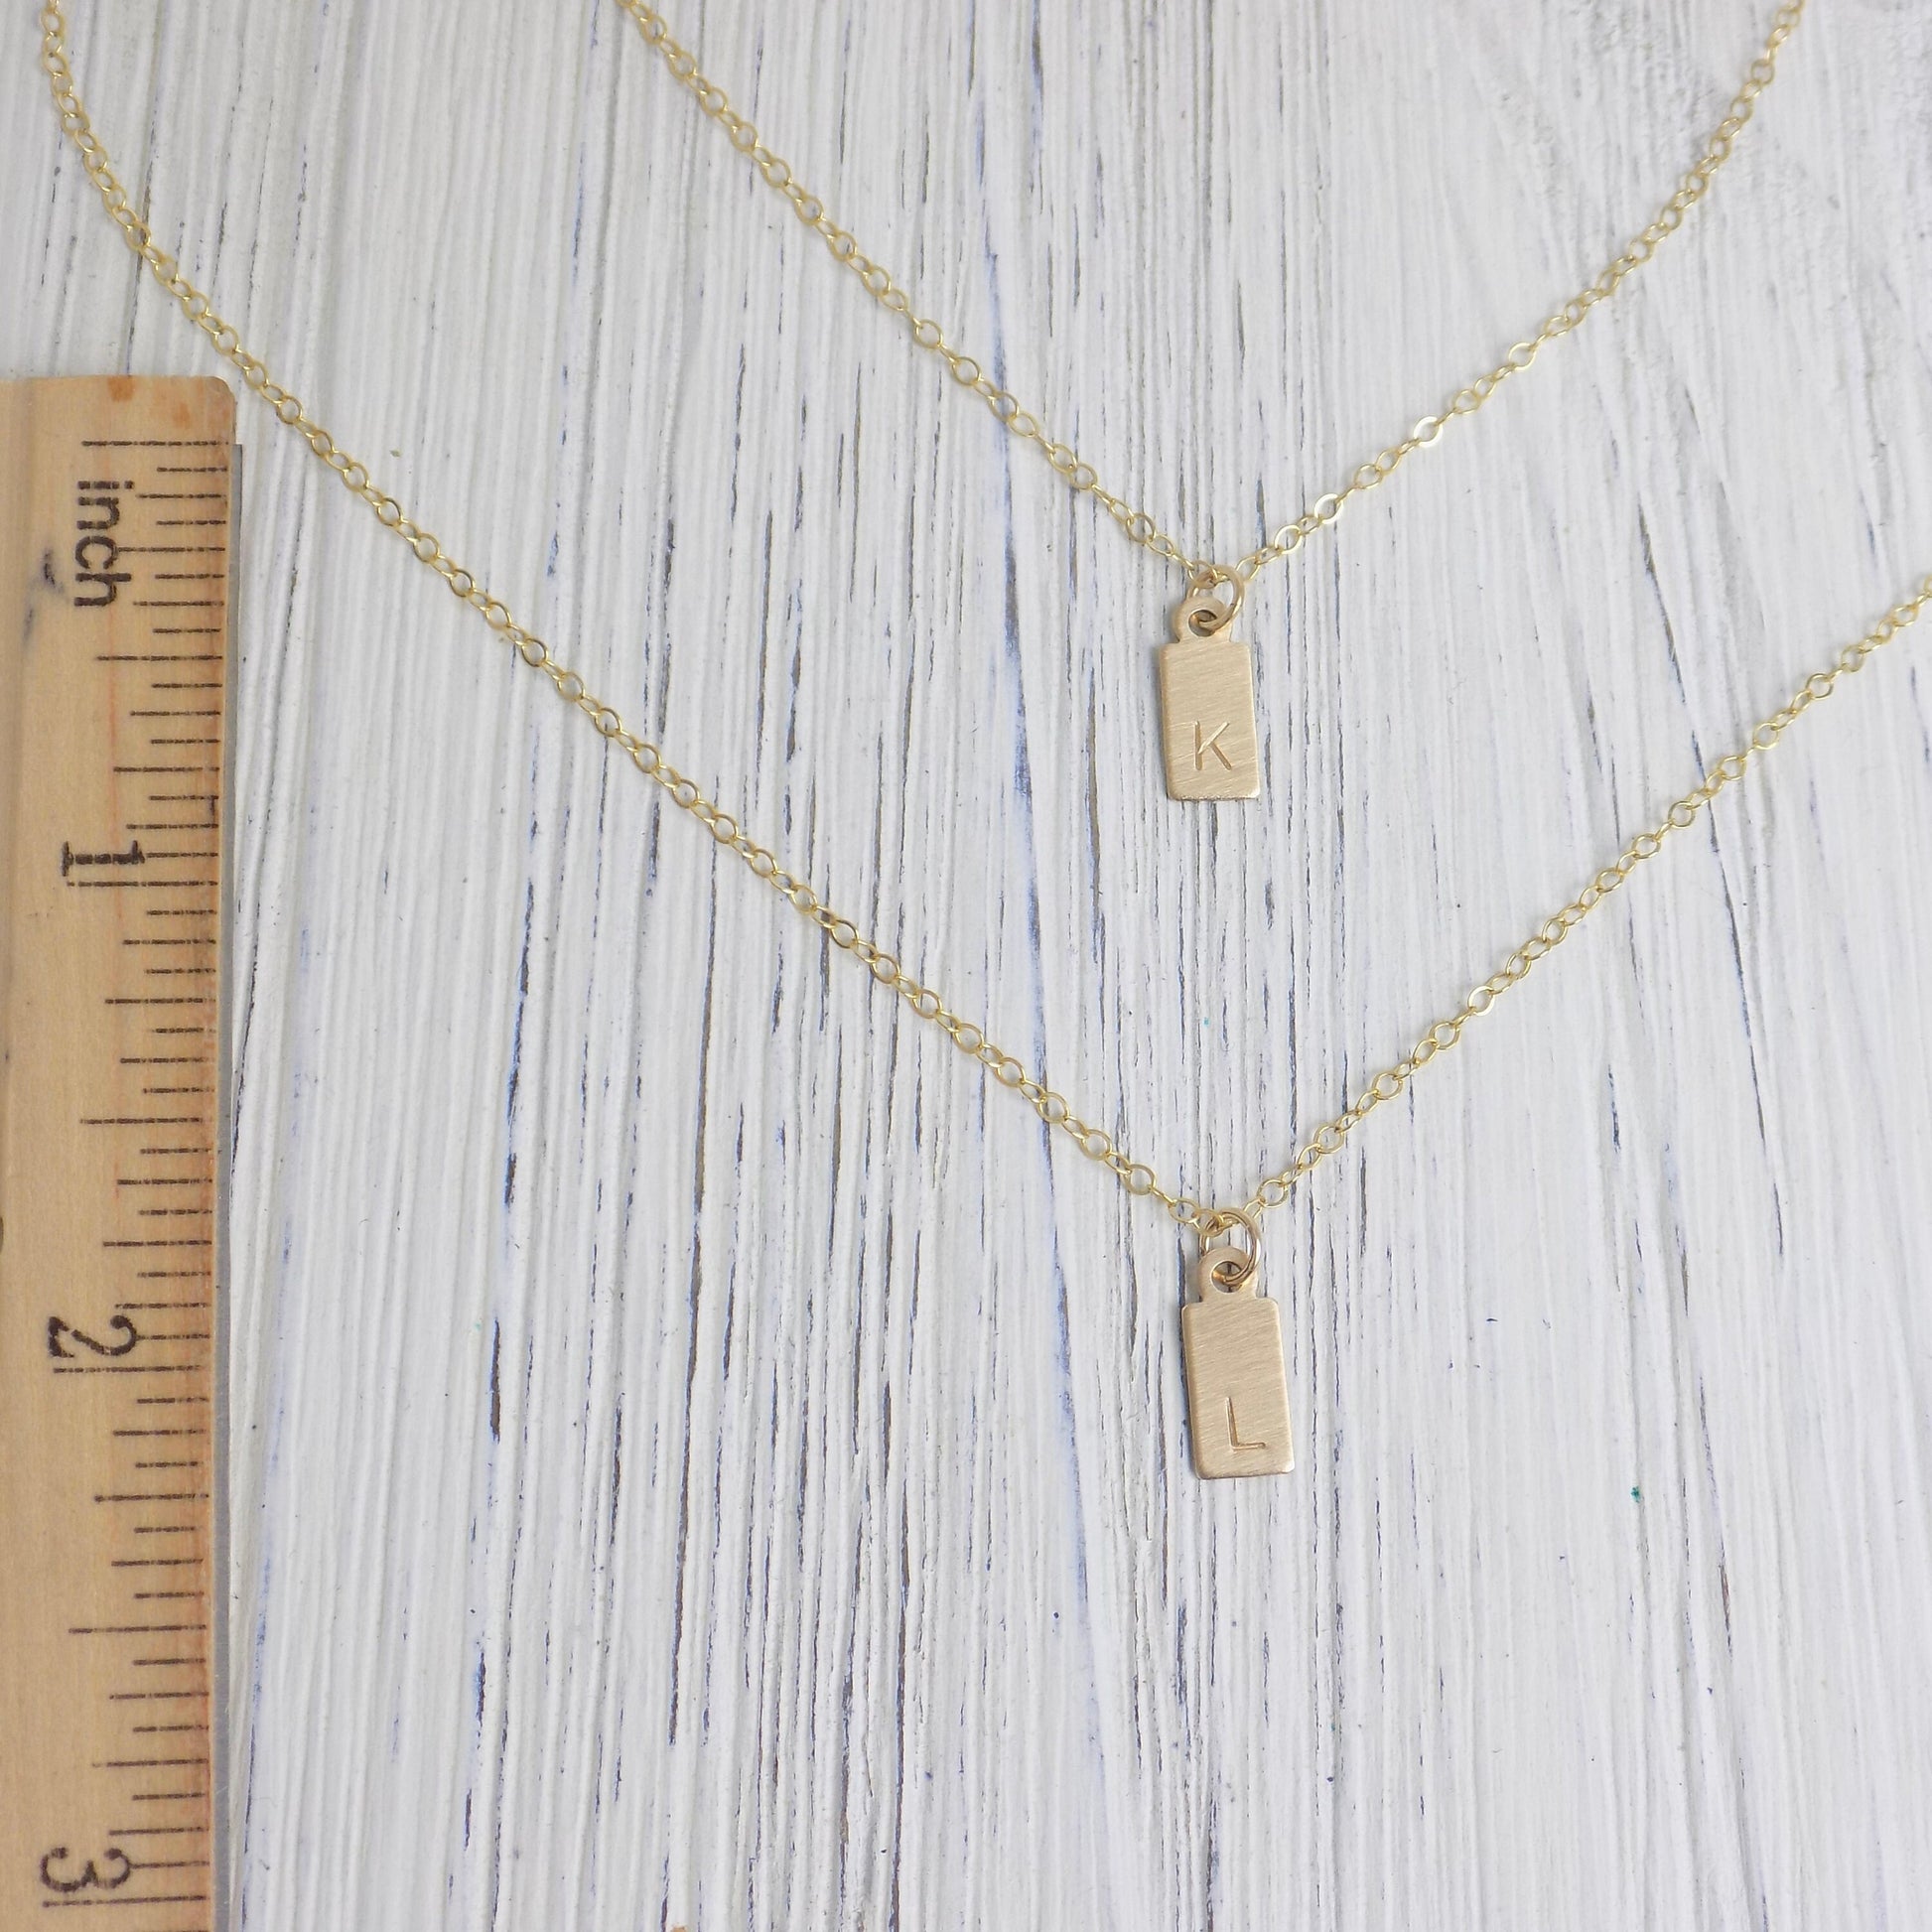 Initial Charm Necklace Set - Small Tag Initial Necklace 14K Gold Filled Brushed Matte Satin Finish Personalized Layered Necklace Gift Women